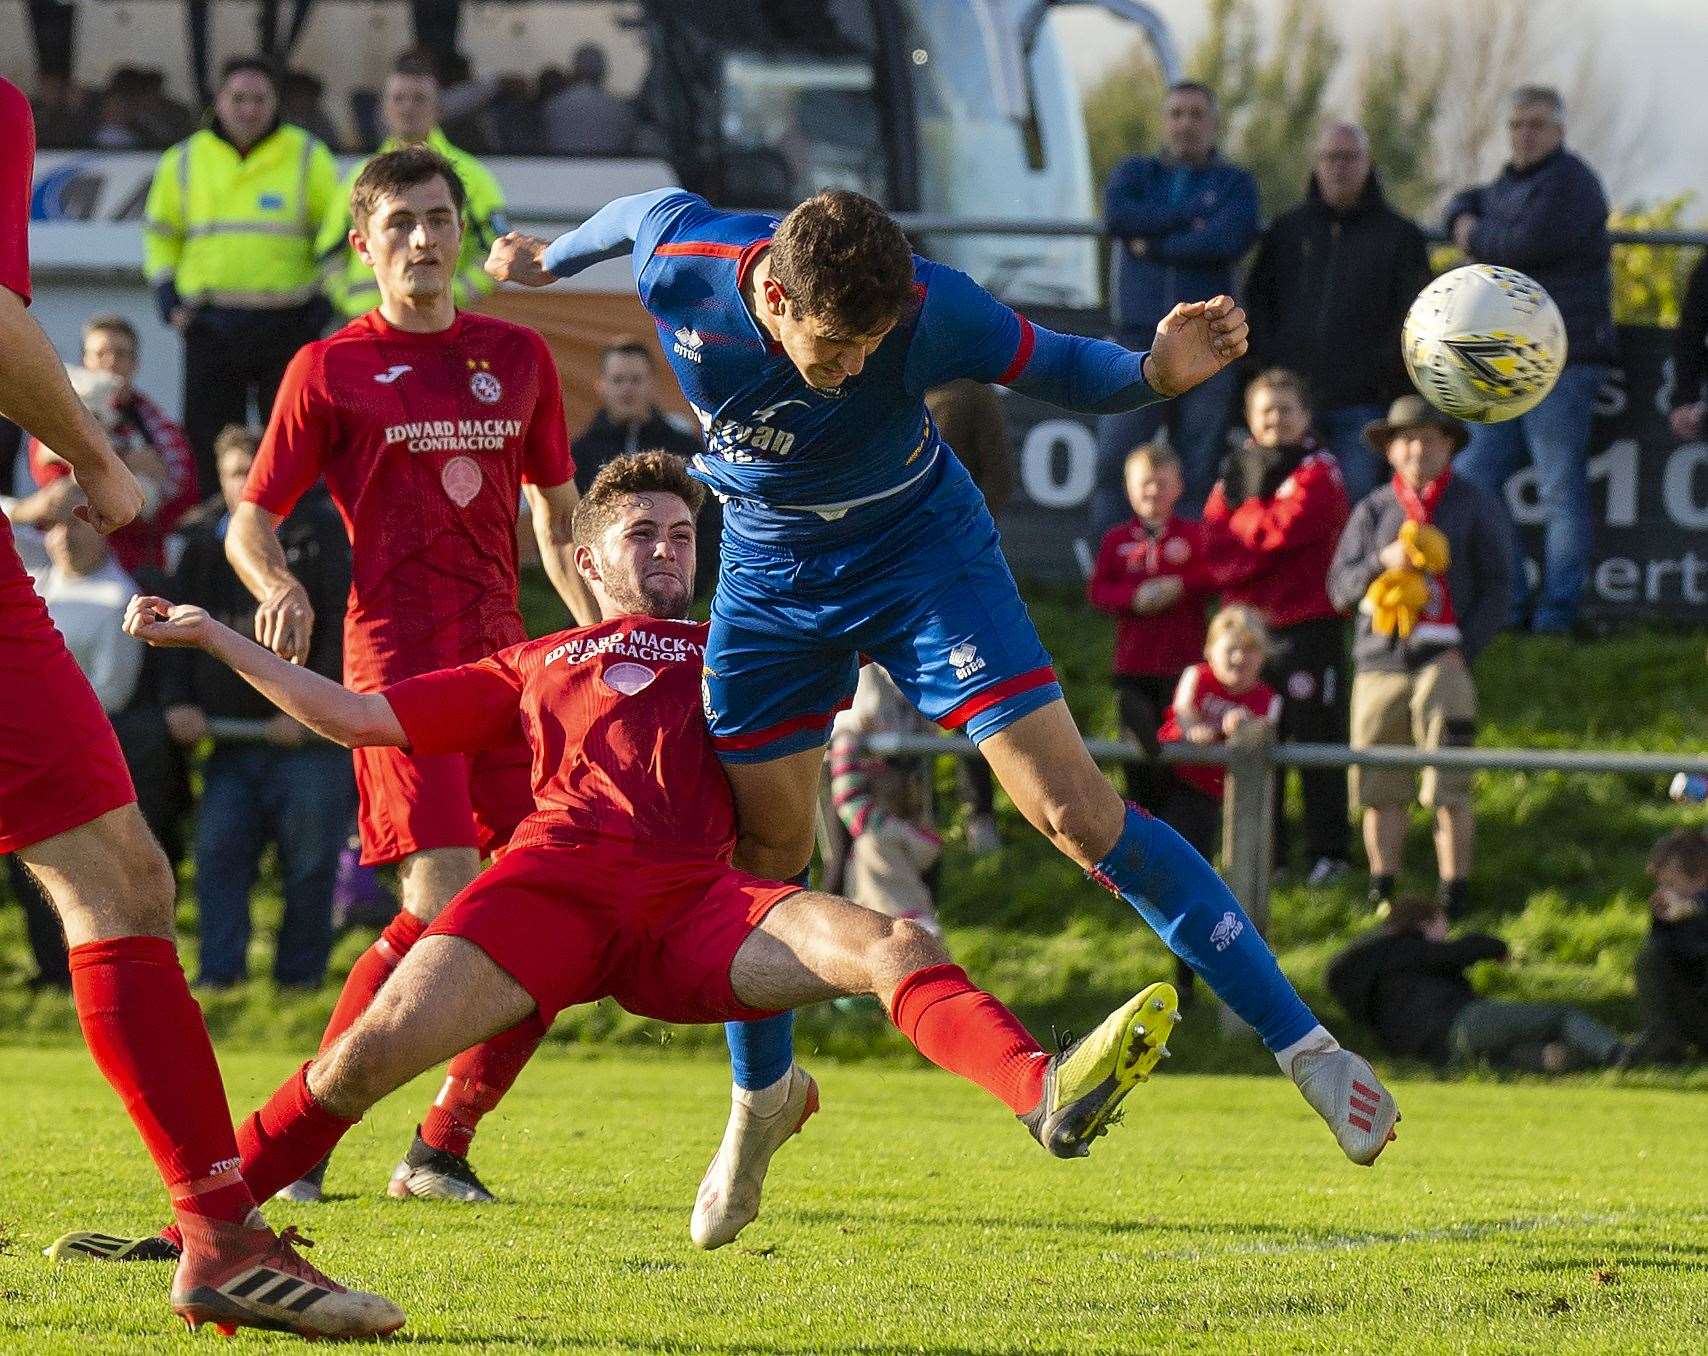 Tom Kelly challenge Caley Thistle's Nikolay Todorov for the ball in the North of Scotland Cup final in 2019.